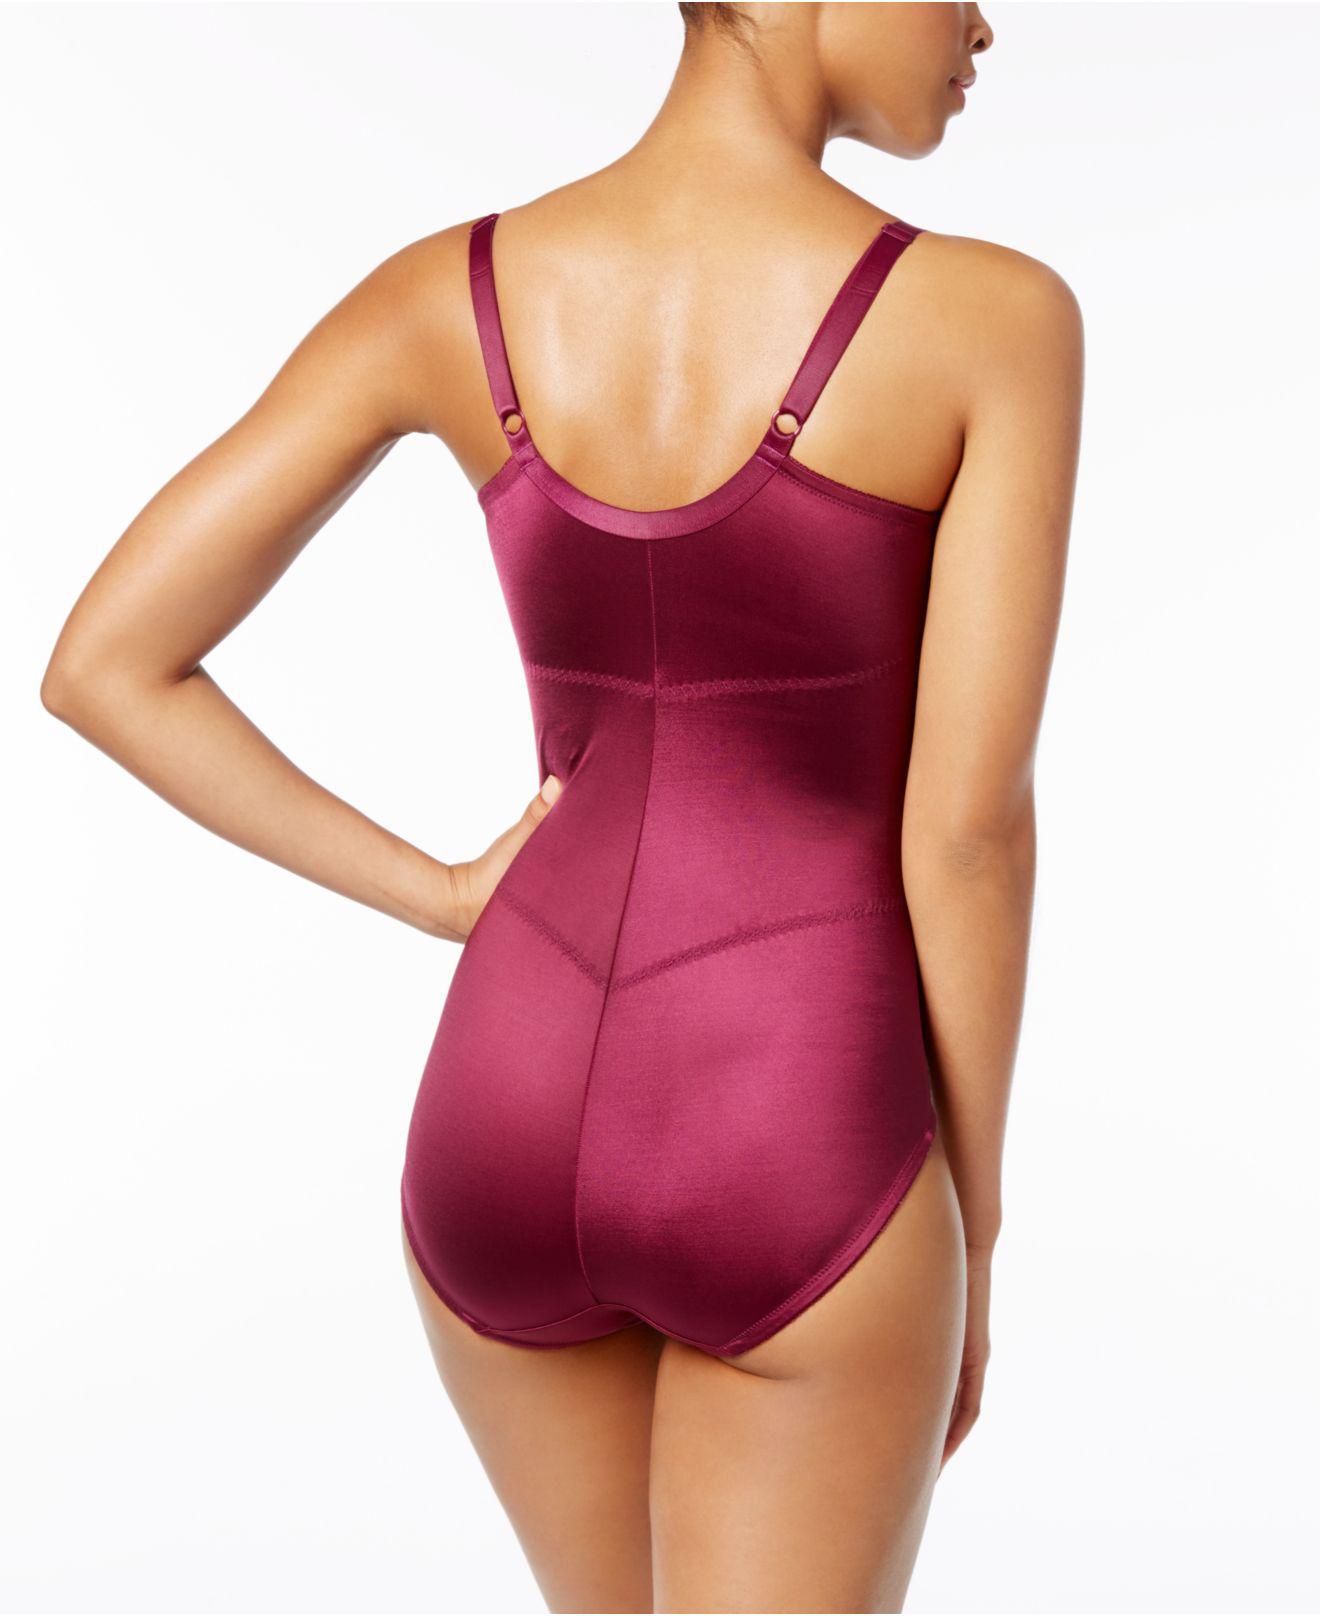 Maidenform Firm Control Embellished Unlined Body Shaper 1456 in